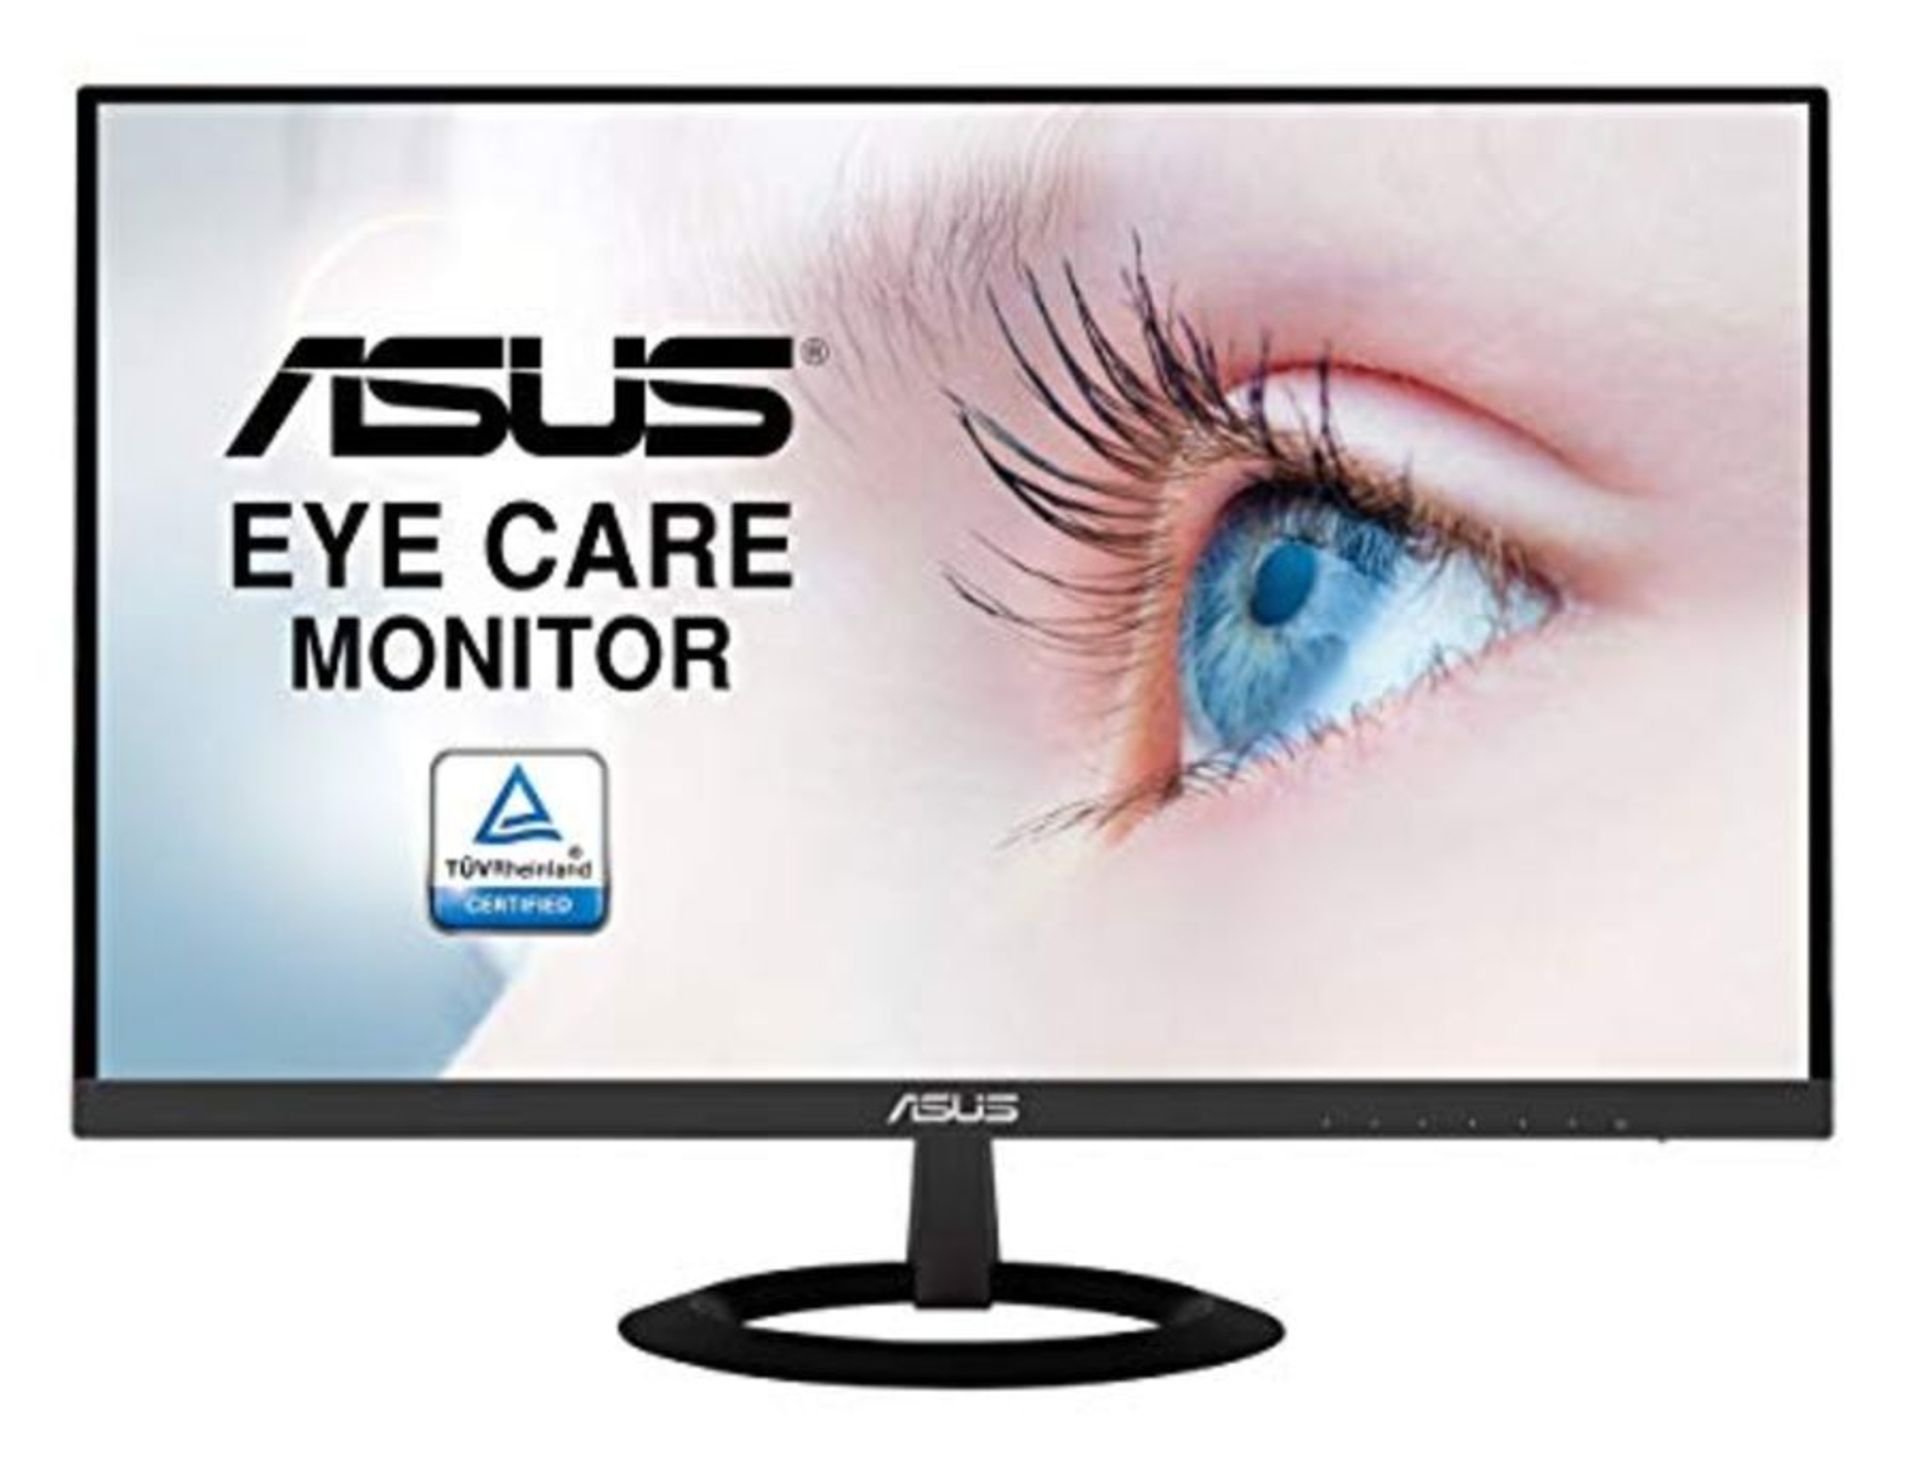 RRP £155.00 [CRACKED] ASUS VZ279HE 27 Inch Monitor, FHD (1920 x 1080), IPS, Ultra-Slim Design, HDM